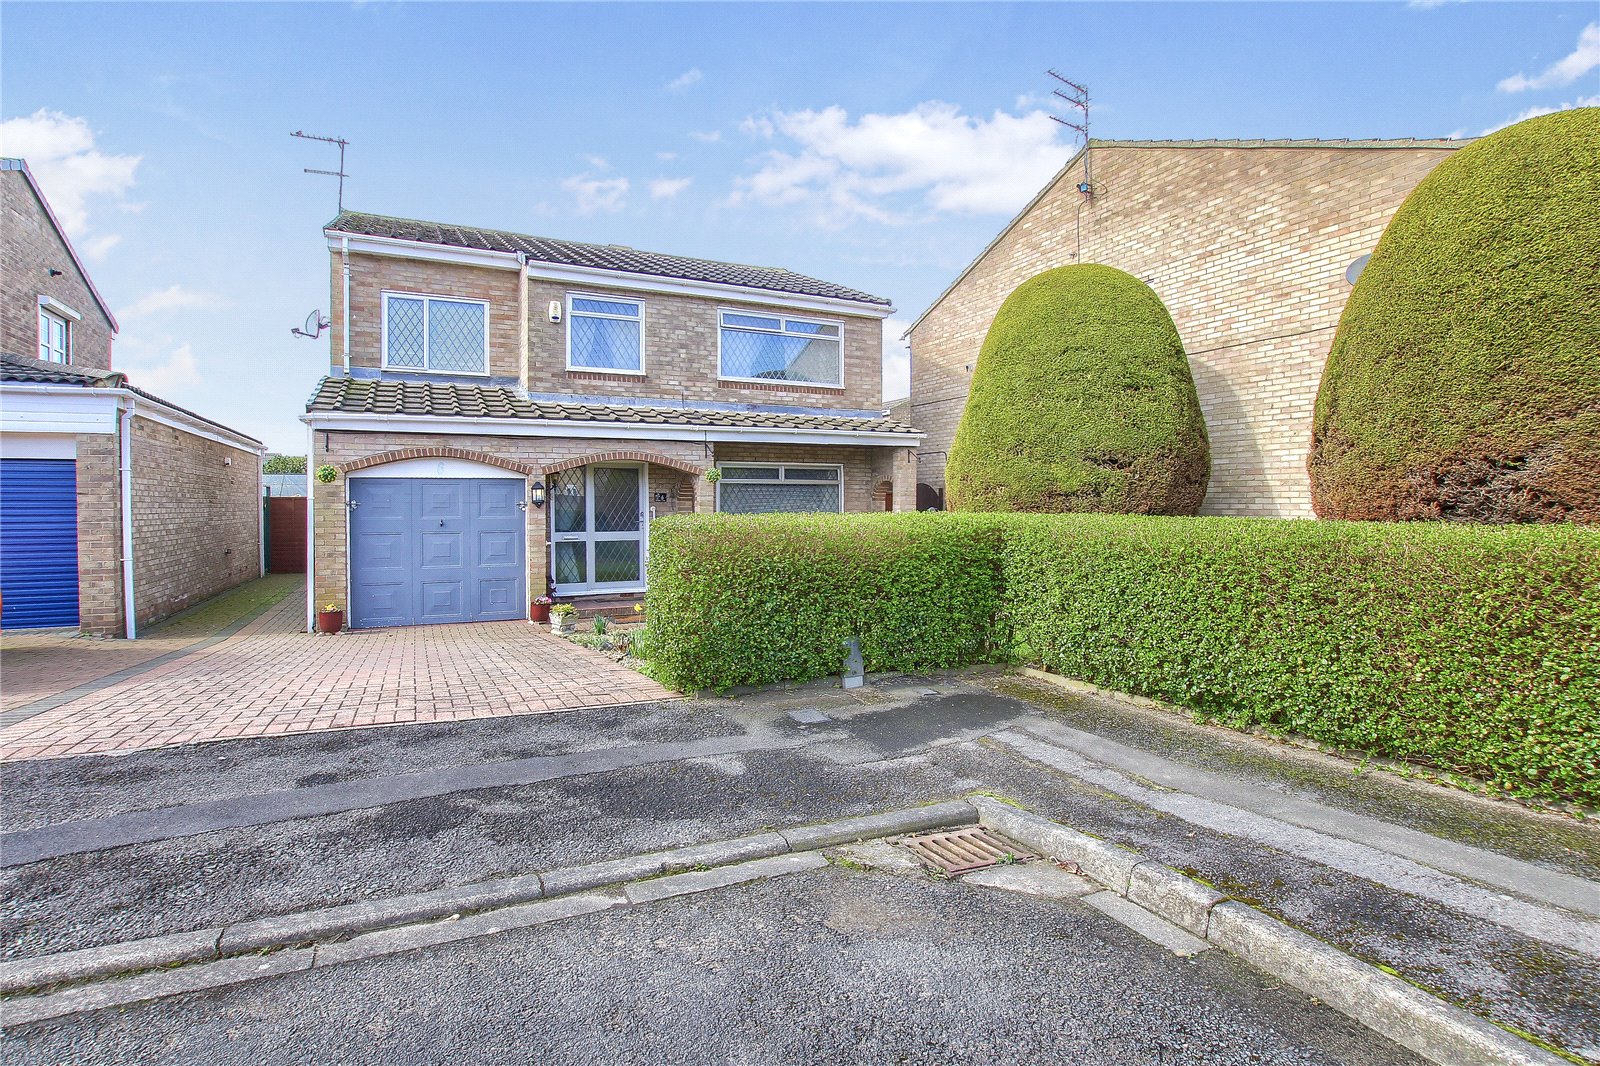 4 bed house for sale in Watton Close, South Fens - Property Image 1